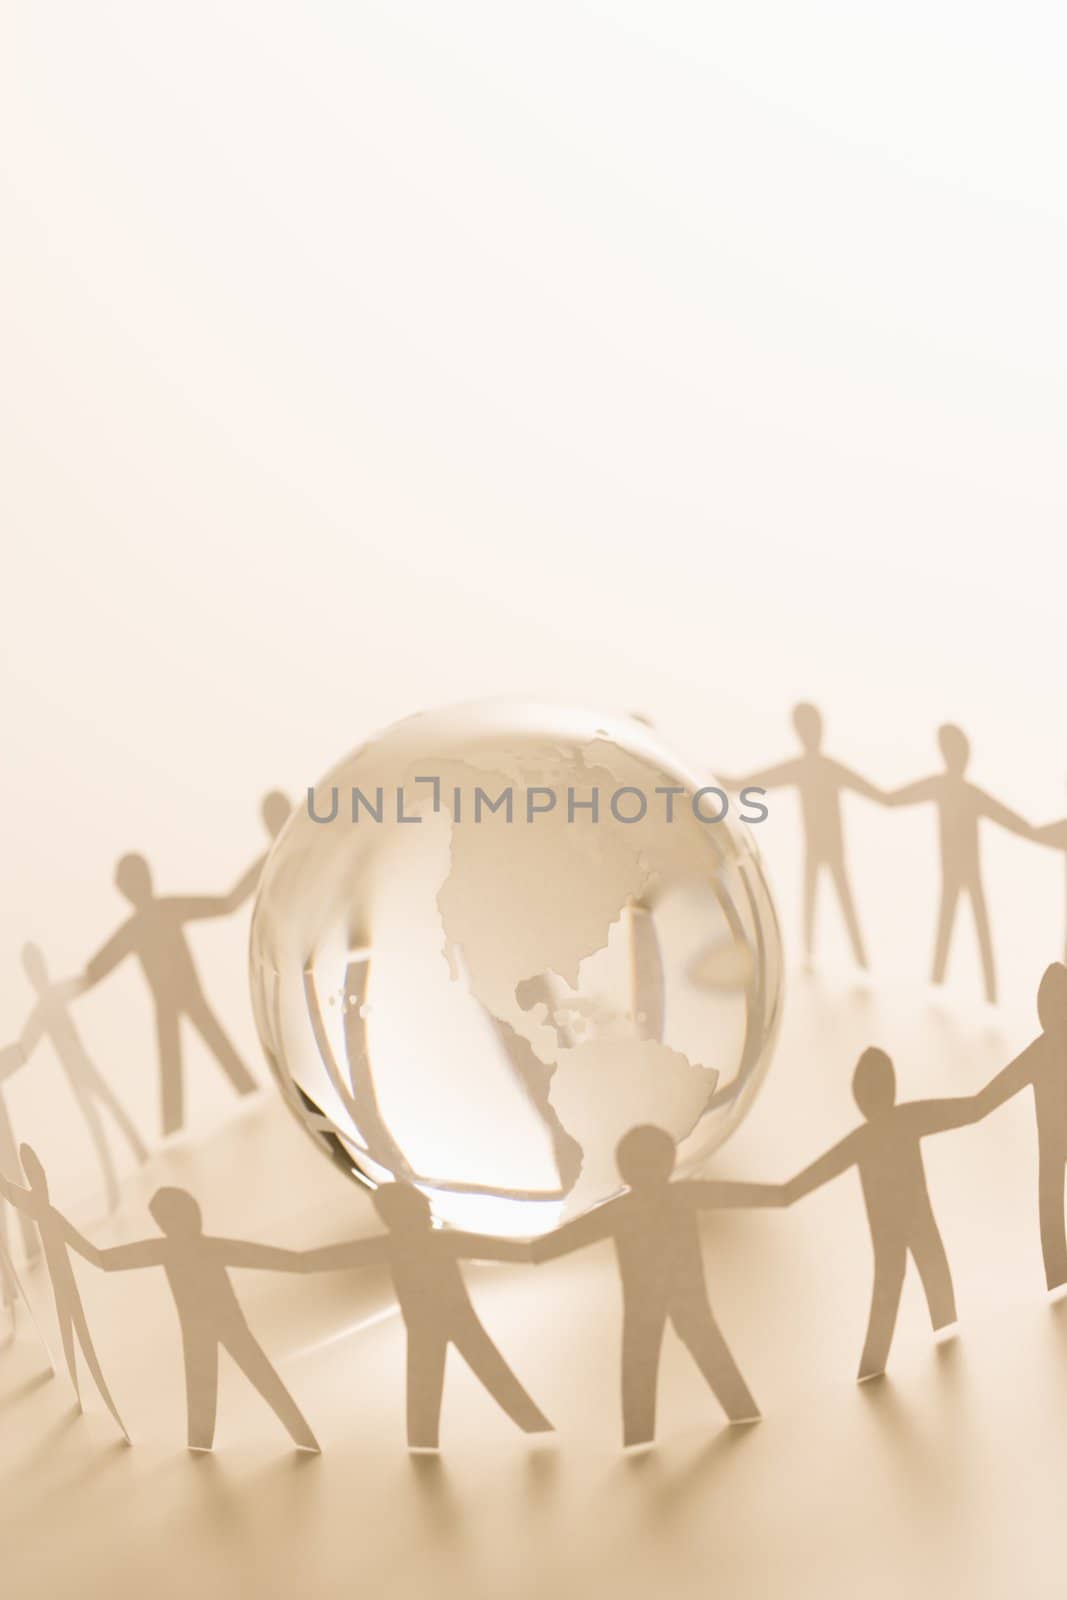 Cutout paper people standing around globe holding hands.